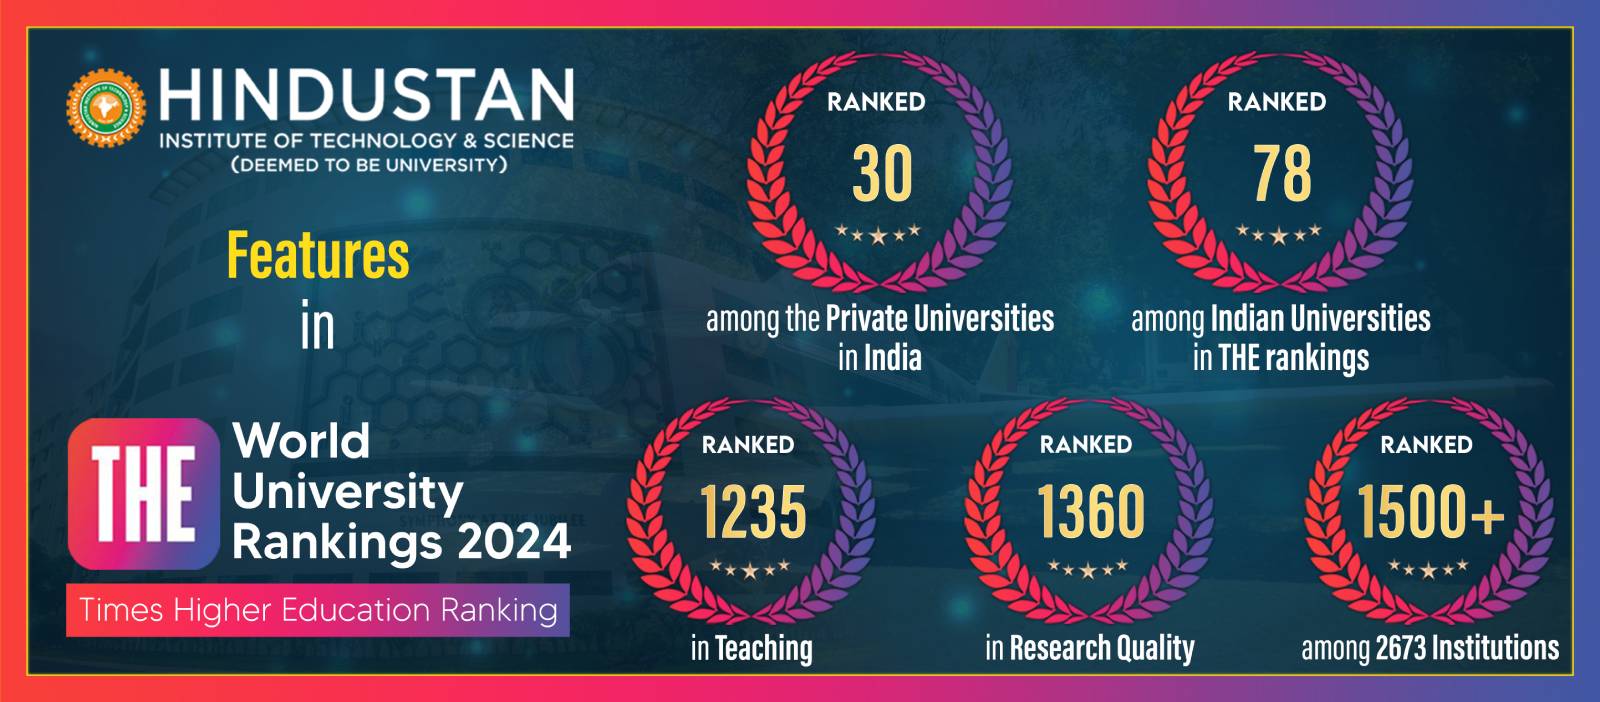 Times Higher Education Ranking